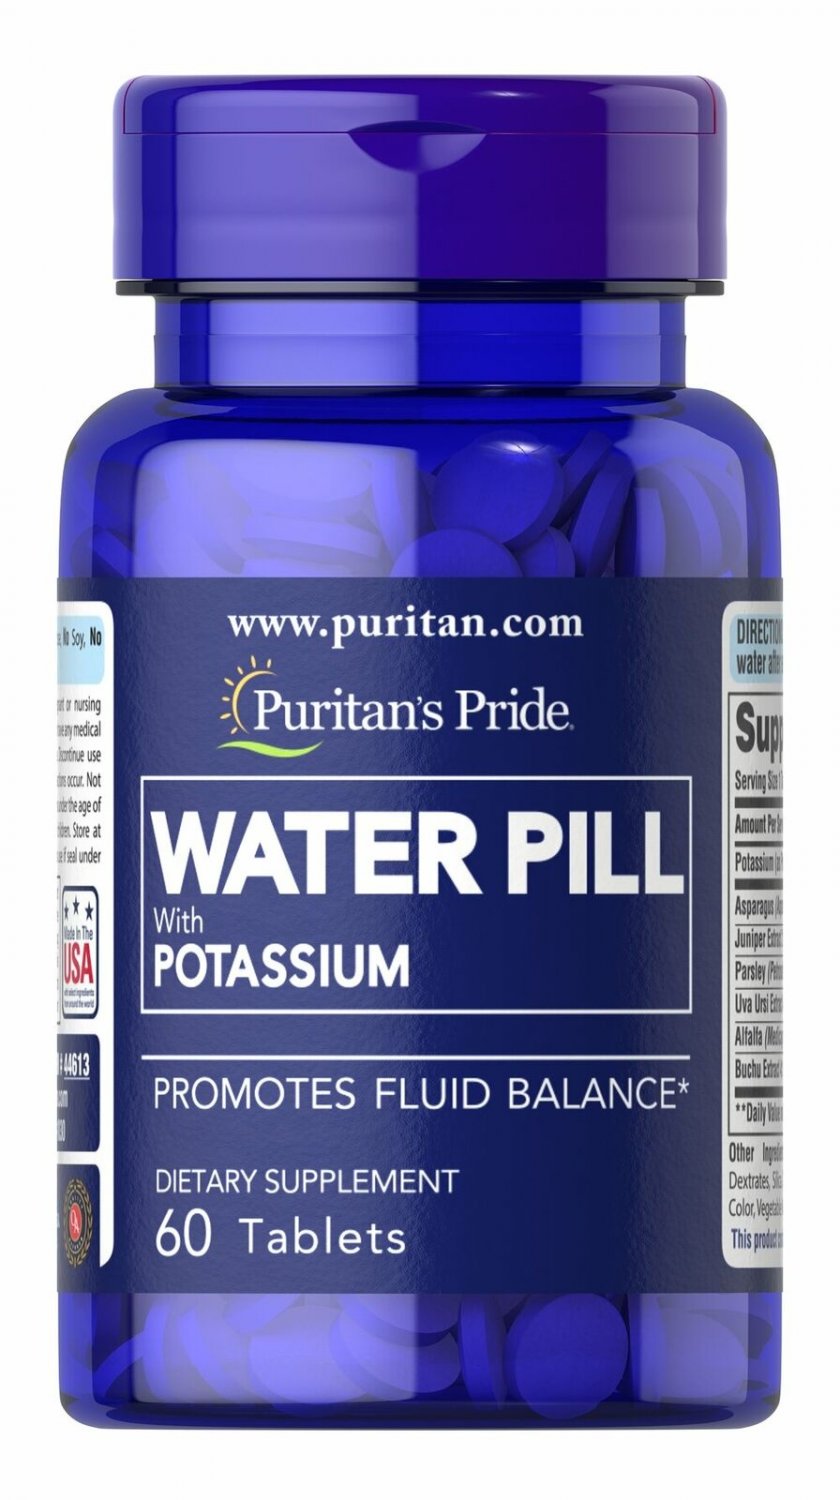 Puritan's Pride Water Pill with Potassium - 60 Tablets